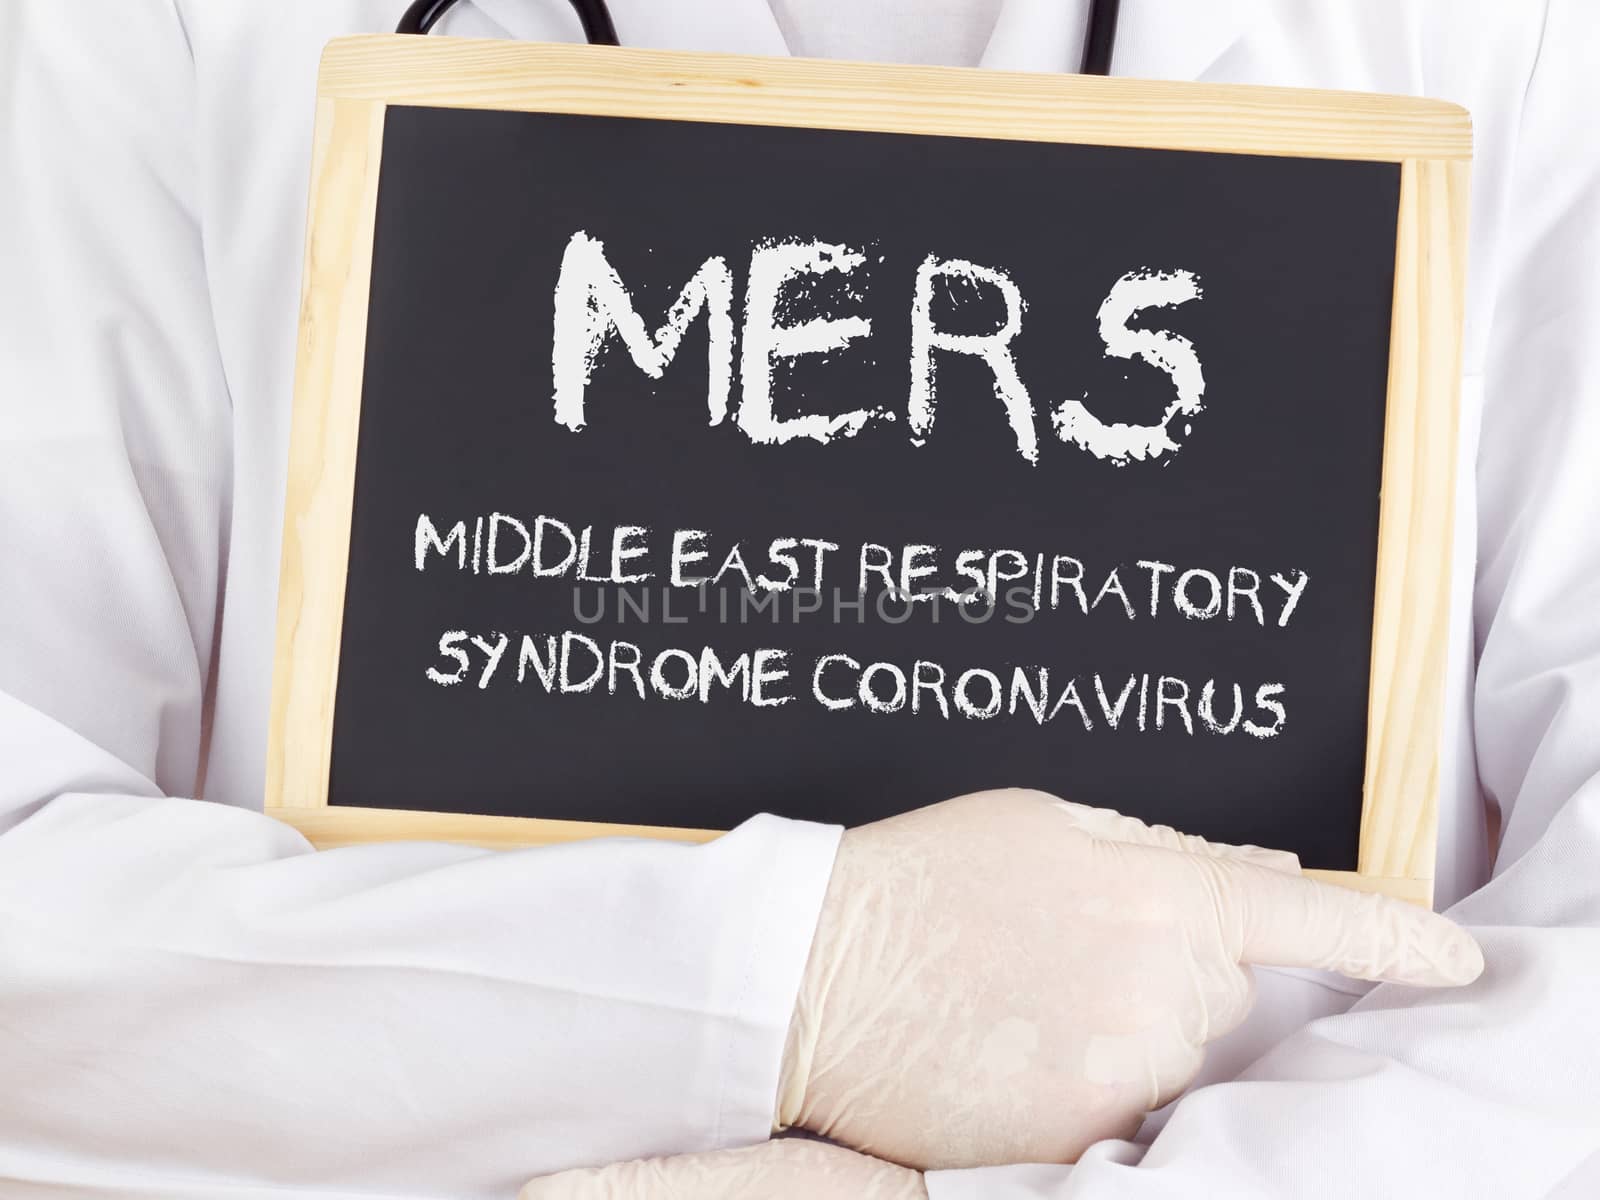 Doctor shows information: MERS